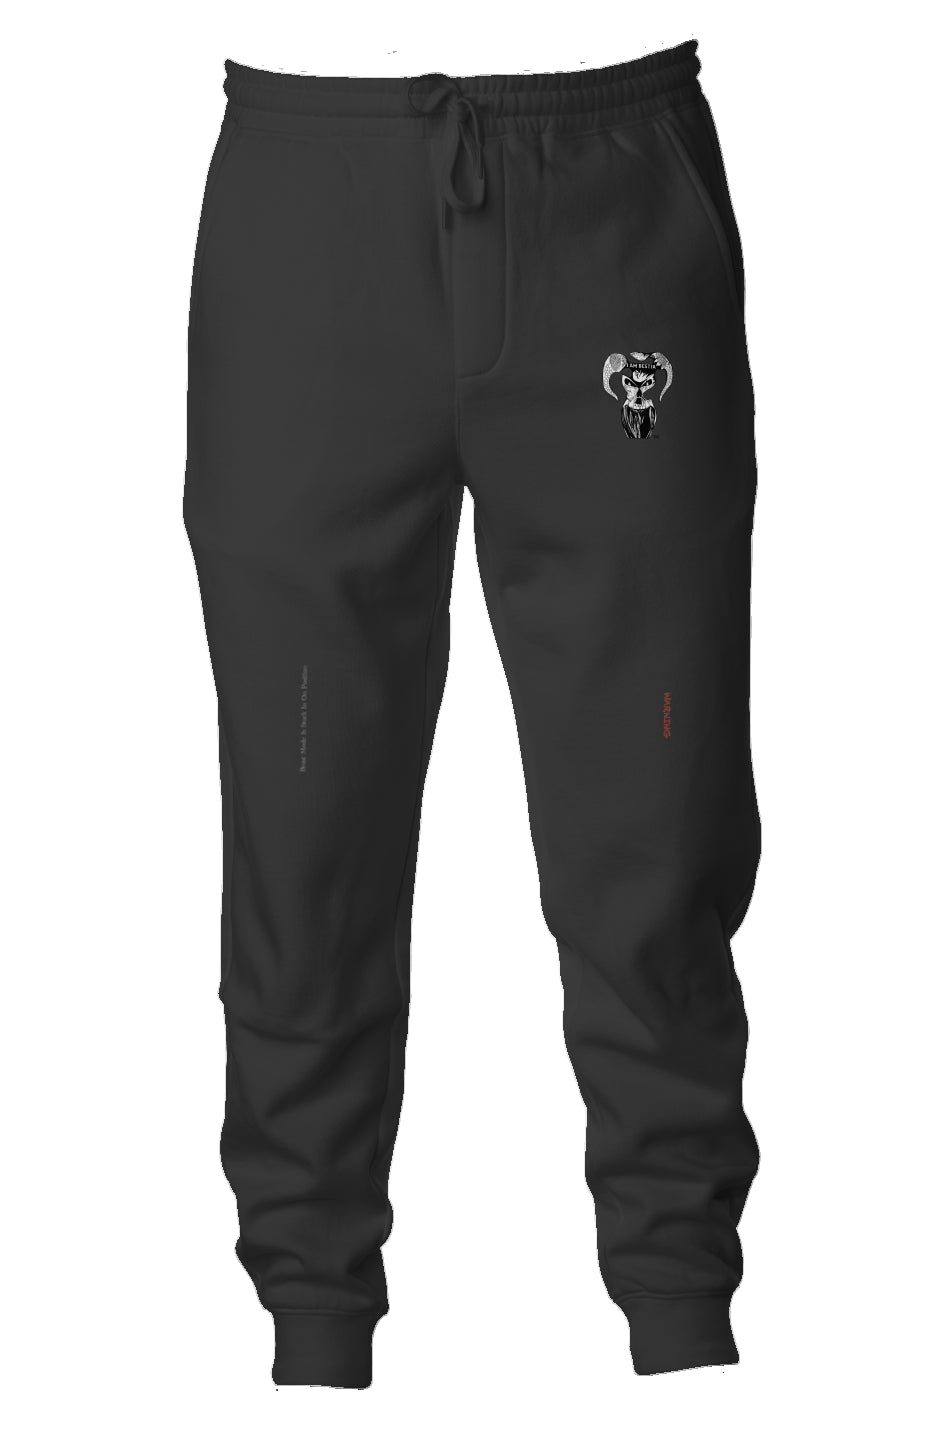 Black & White Edition Joggers with Warning Slogan